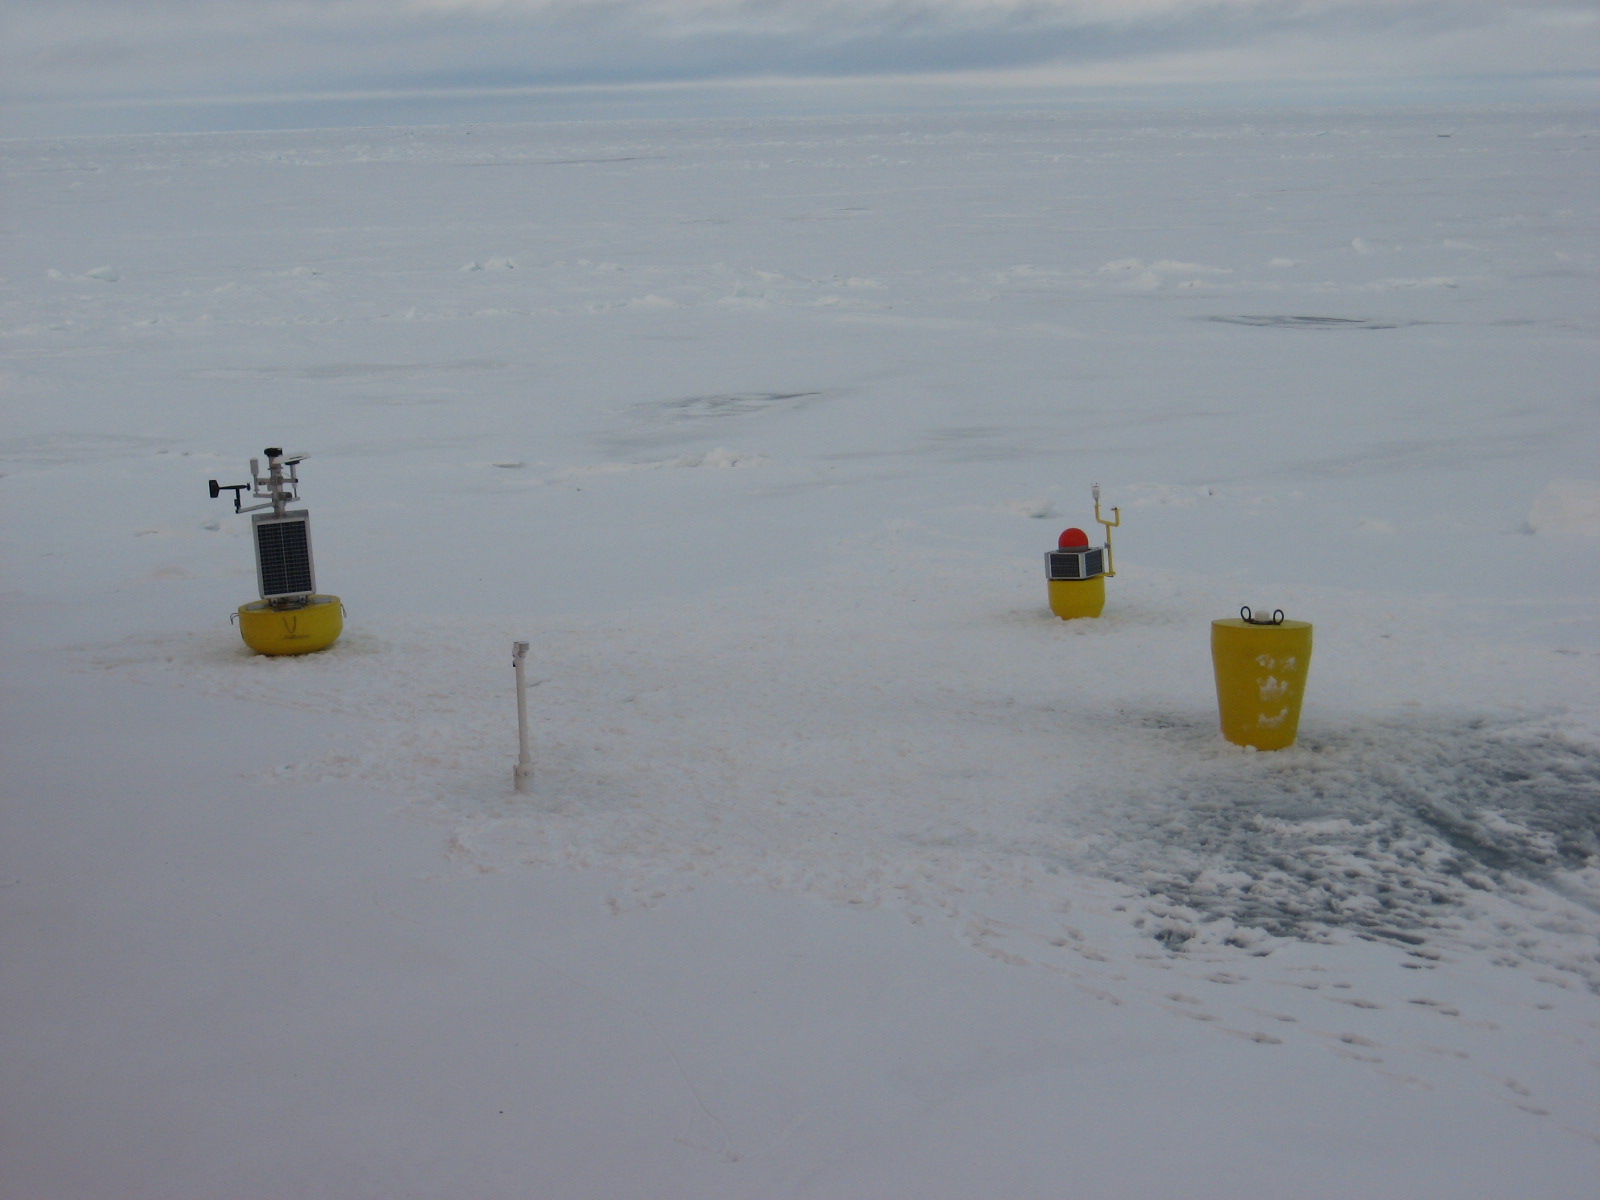 Second and last Ice-Based Observatory deployed during NABOS 2015 consisting of (from left to right) O-Buoy, S-IMB, AOFB, and ITP 92 as deployed. (Photo by Frank Bahr)